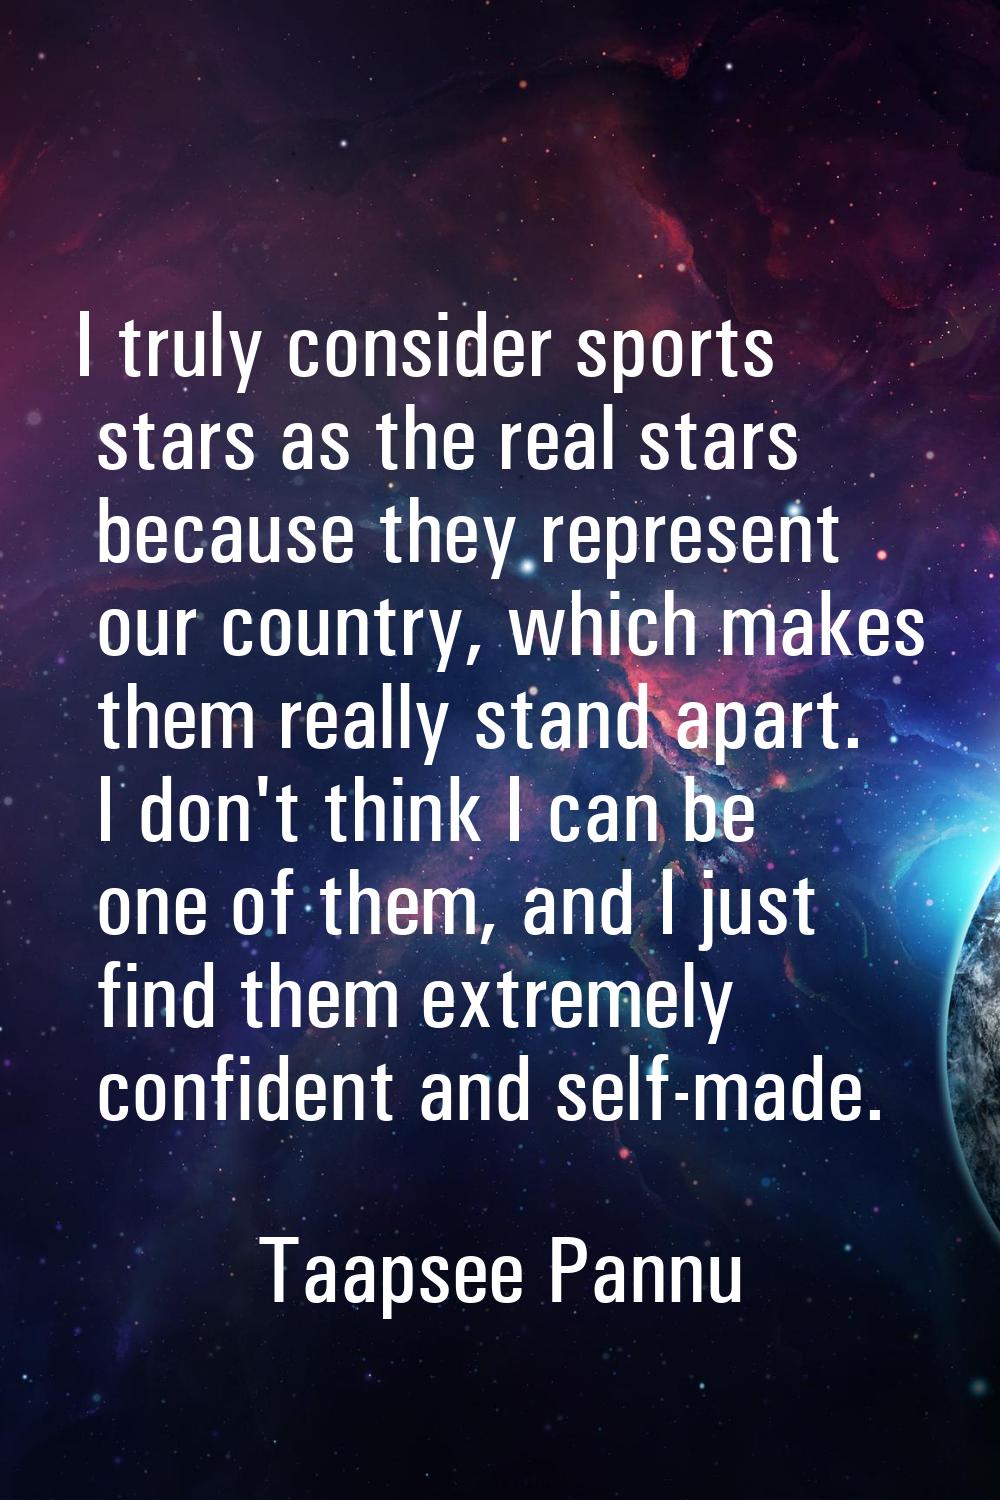 I truly consider sports stars as the real stars because they represent our country, which makes the